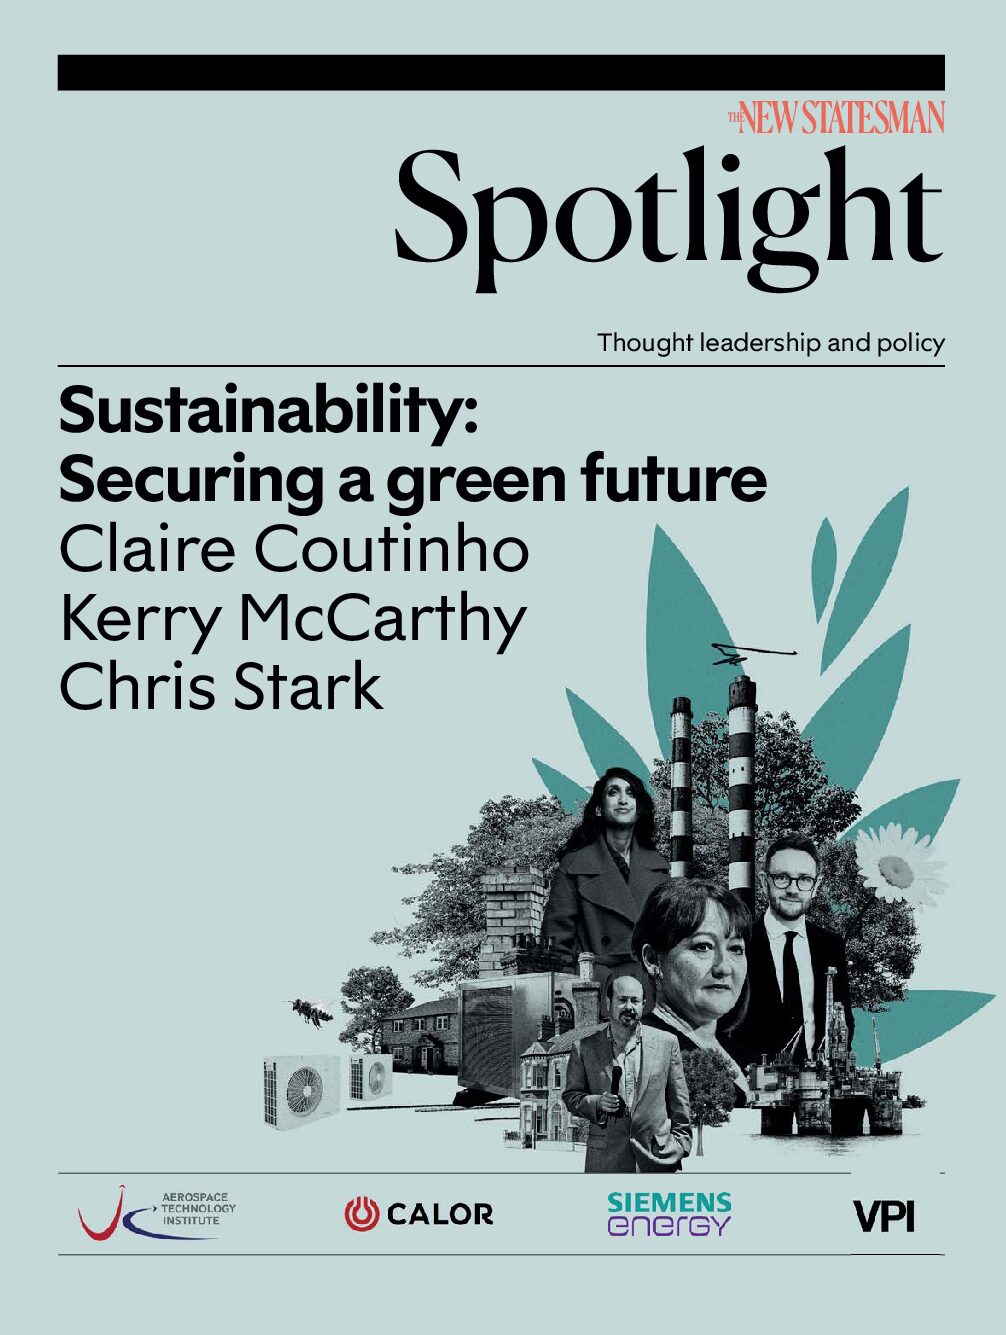 Sustainability: Securing a green future